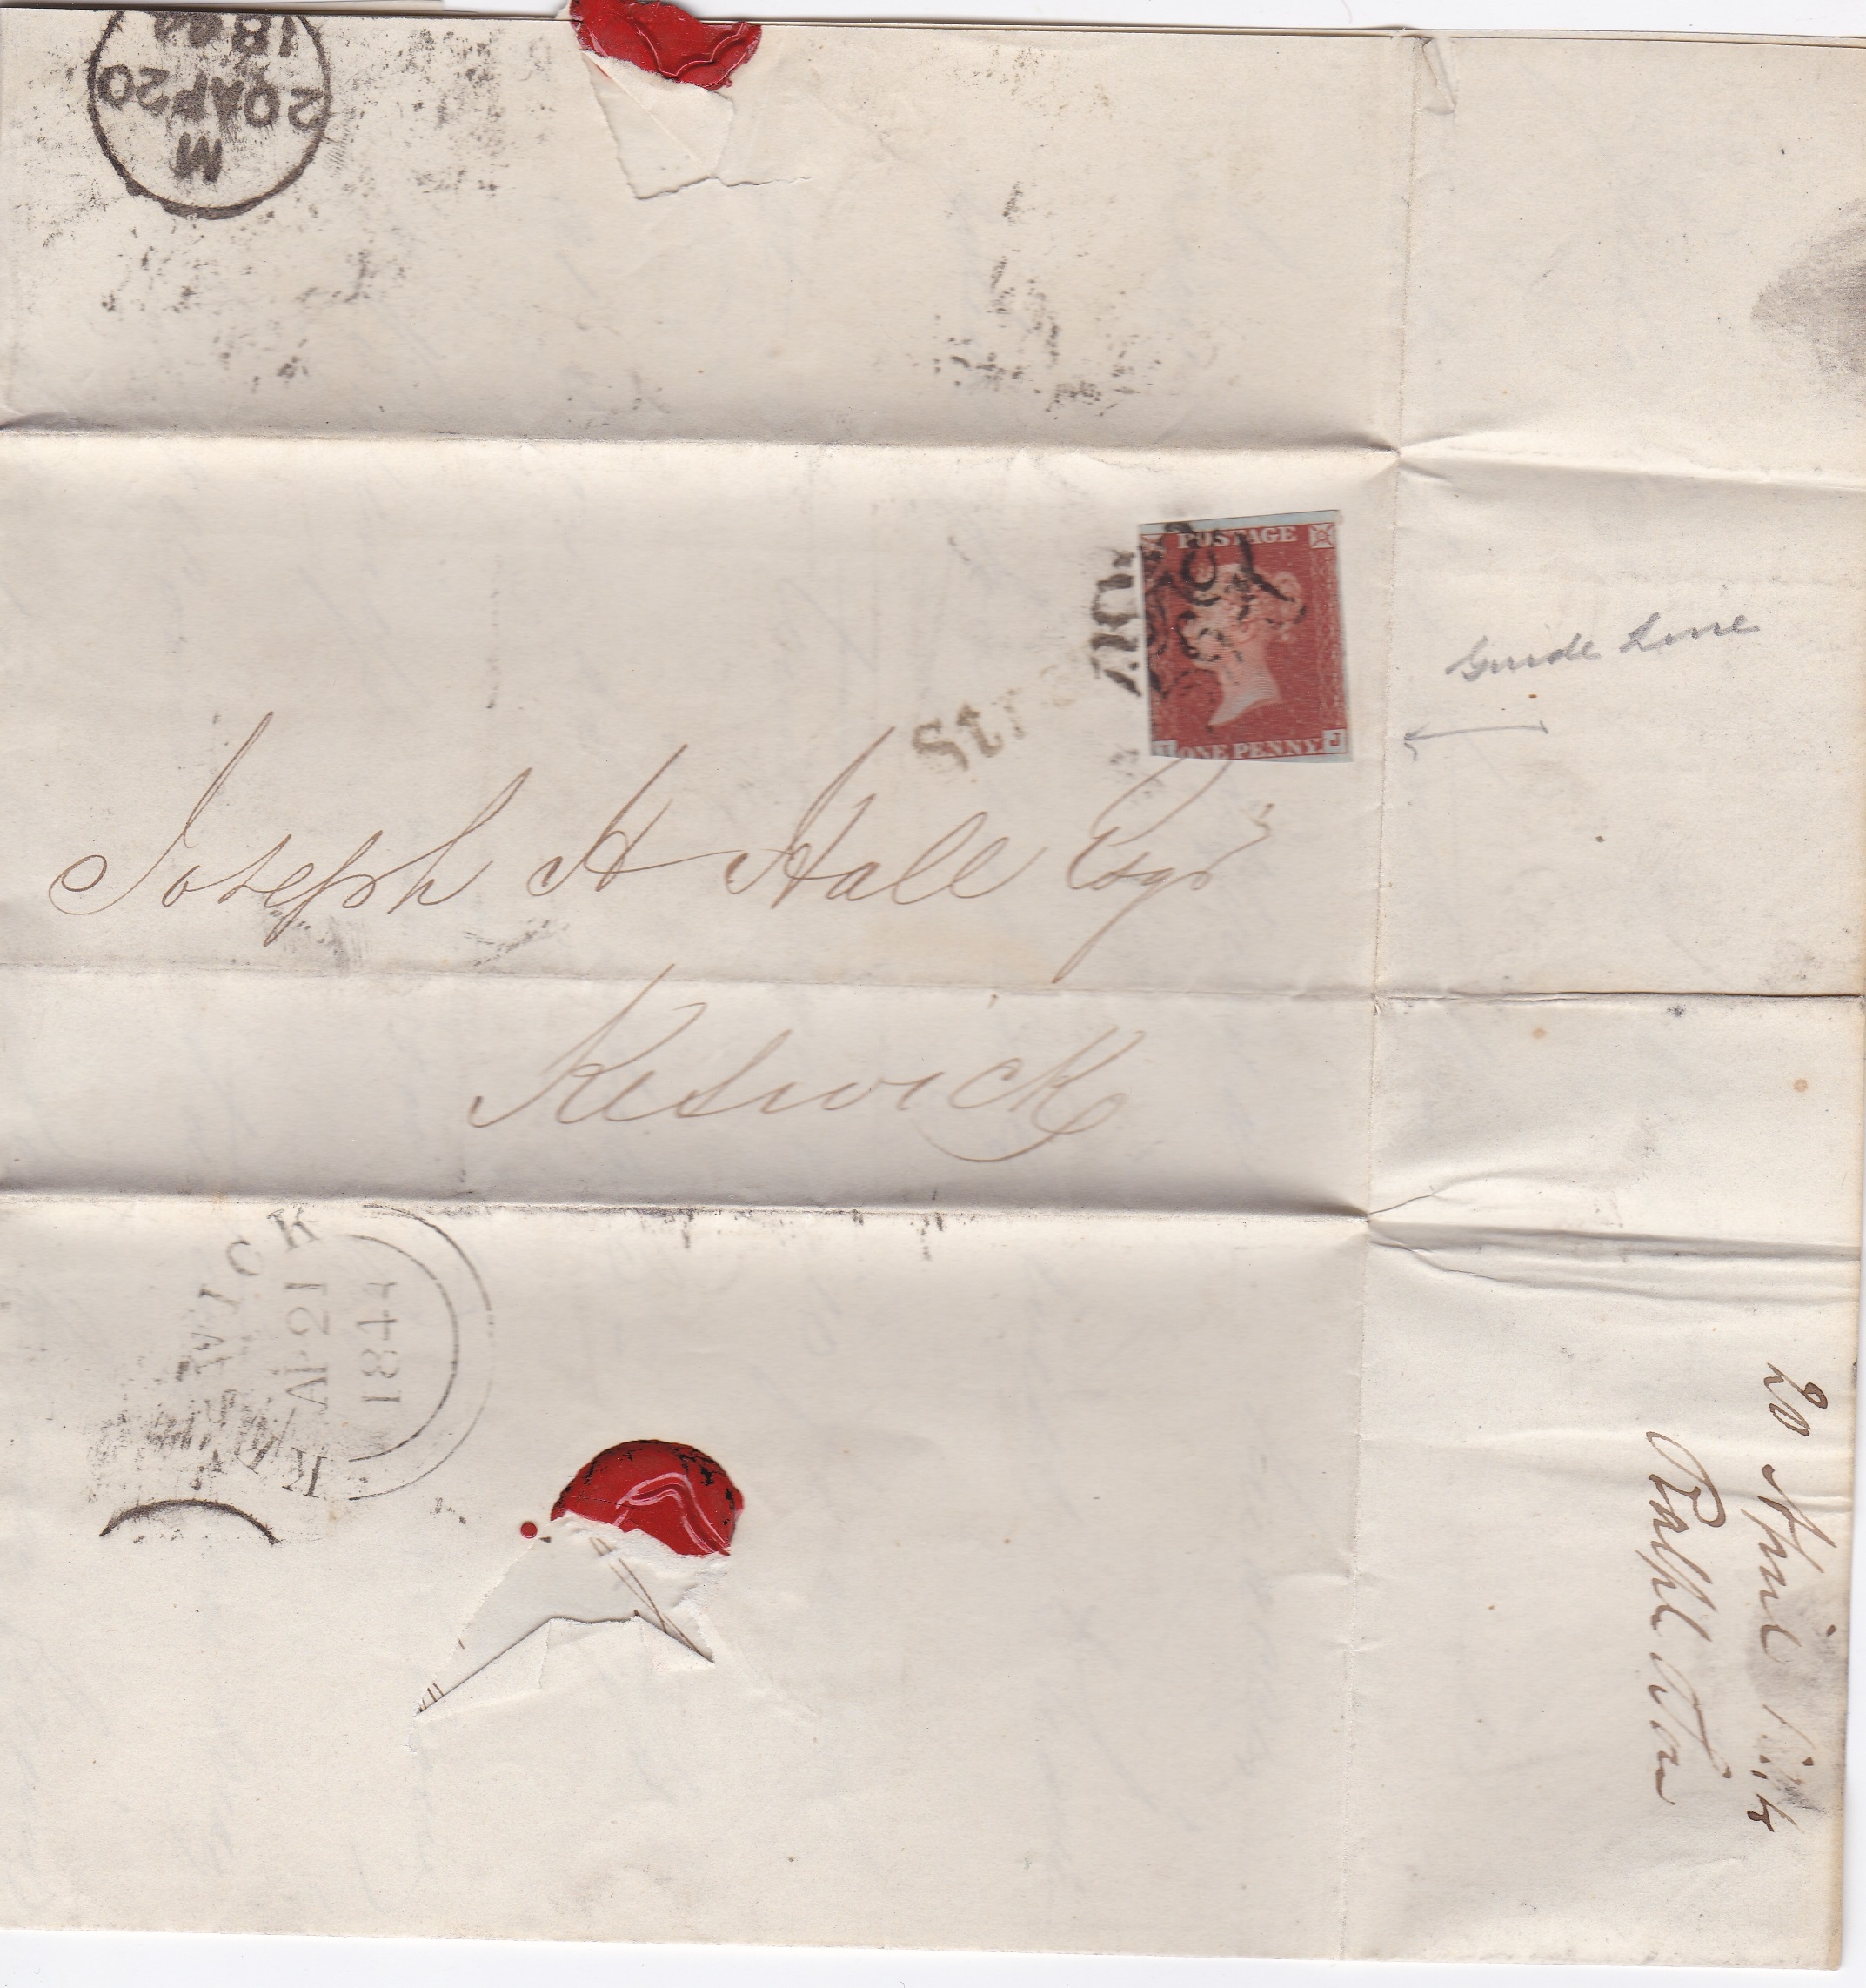 Great Britain 1844 - EL dated 20.4.1844 London posted to Keswick SG8 1d stamp cancelled with Maltese